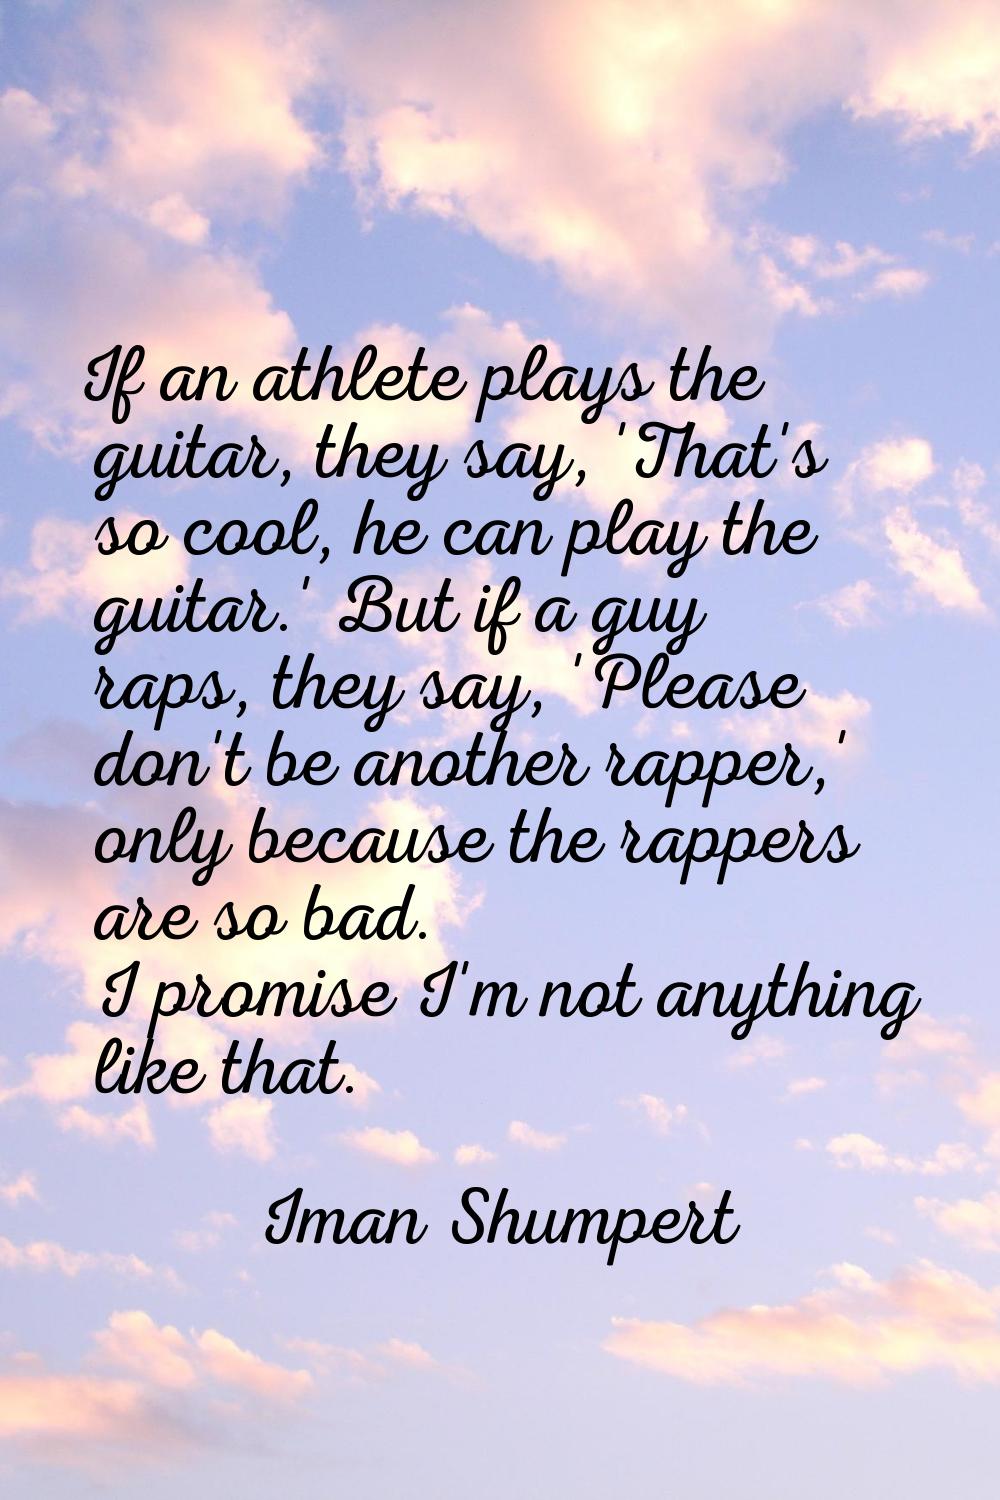 If an athlete plays the guitar, they say, 'That's so cool, he can play the guitar.' But if a guy ra